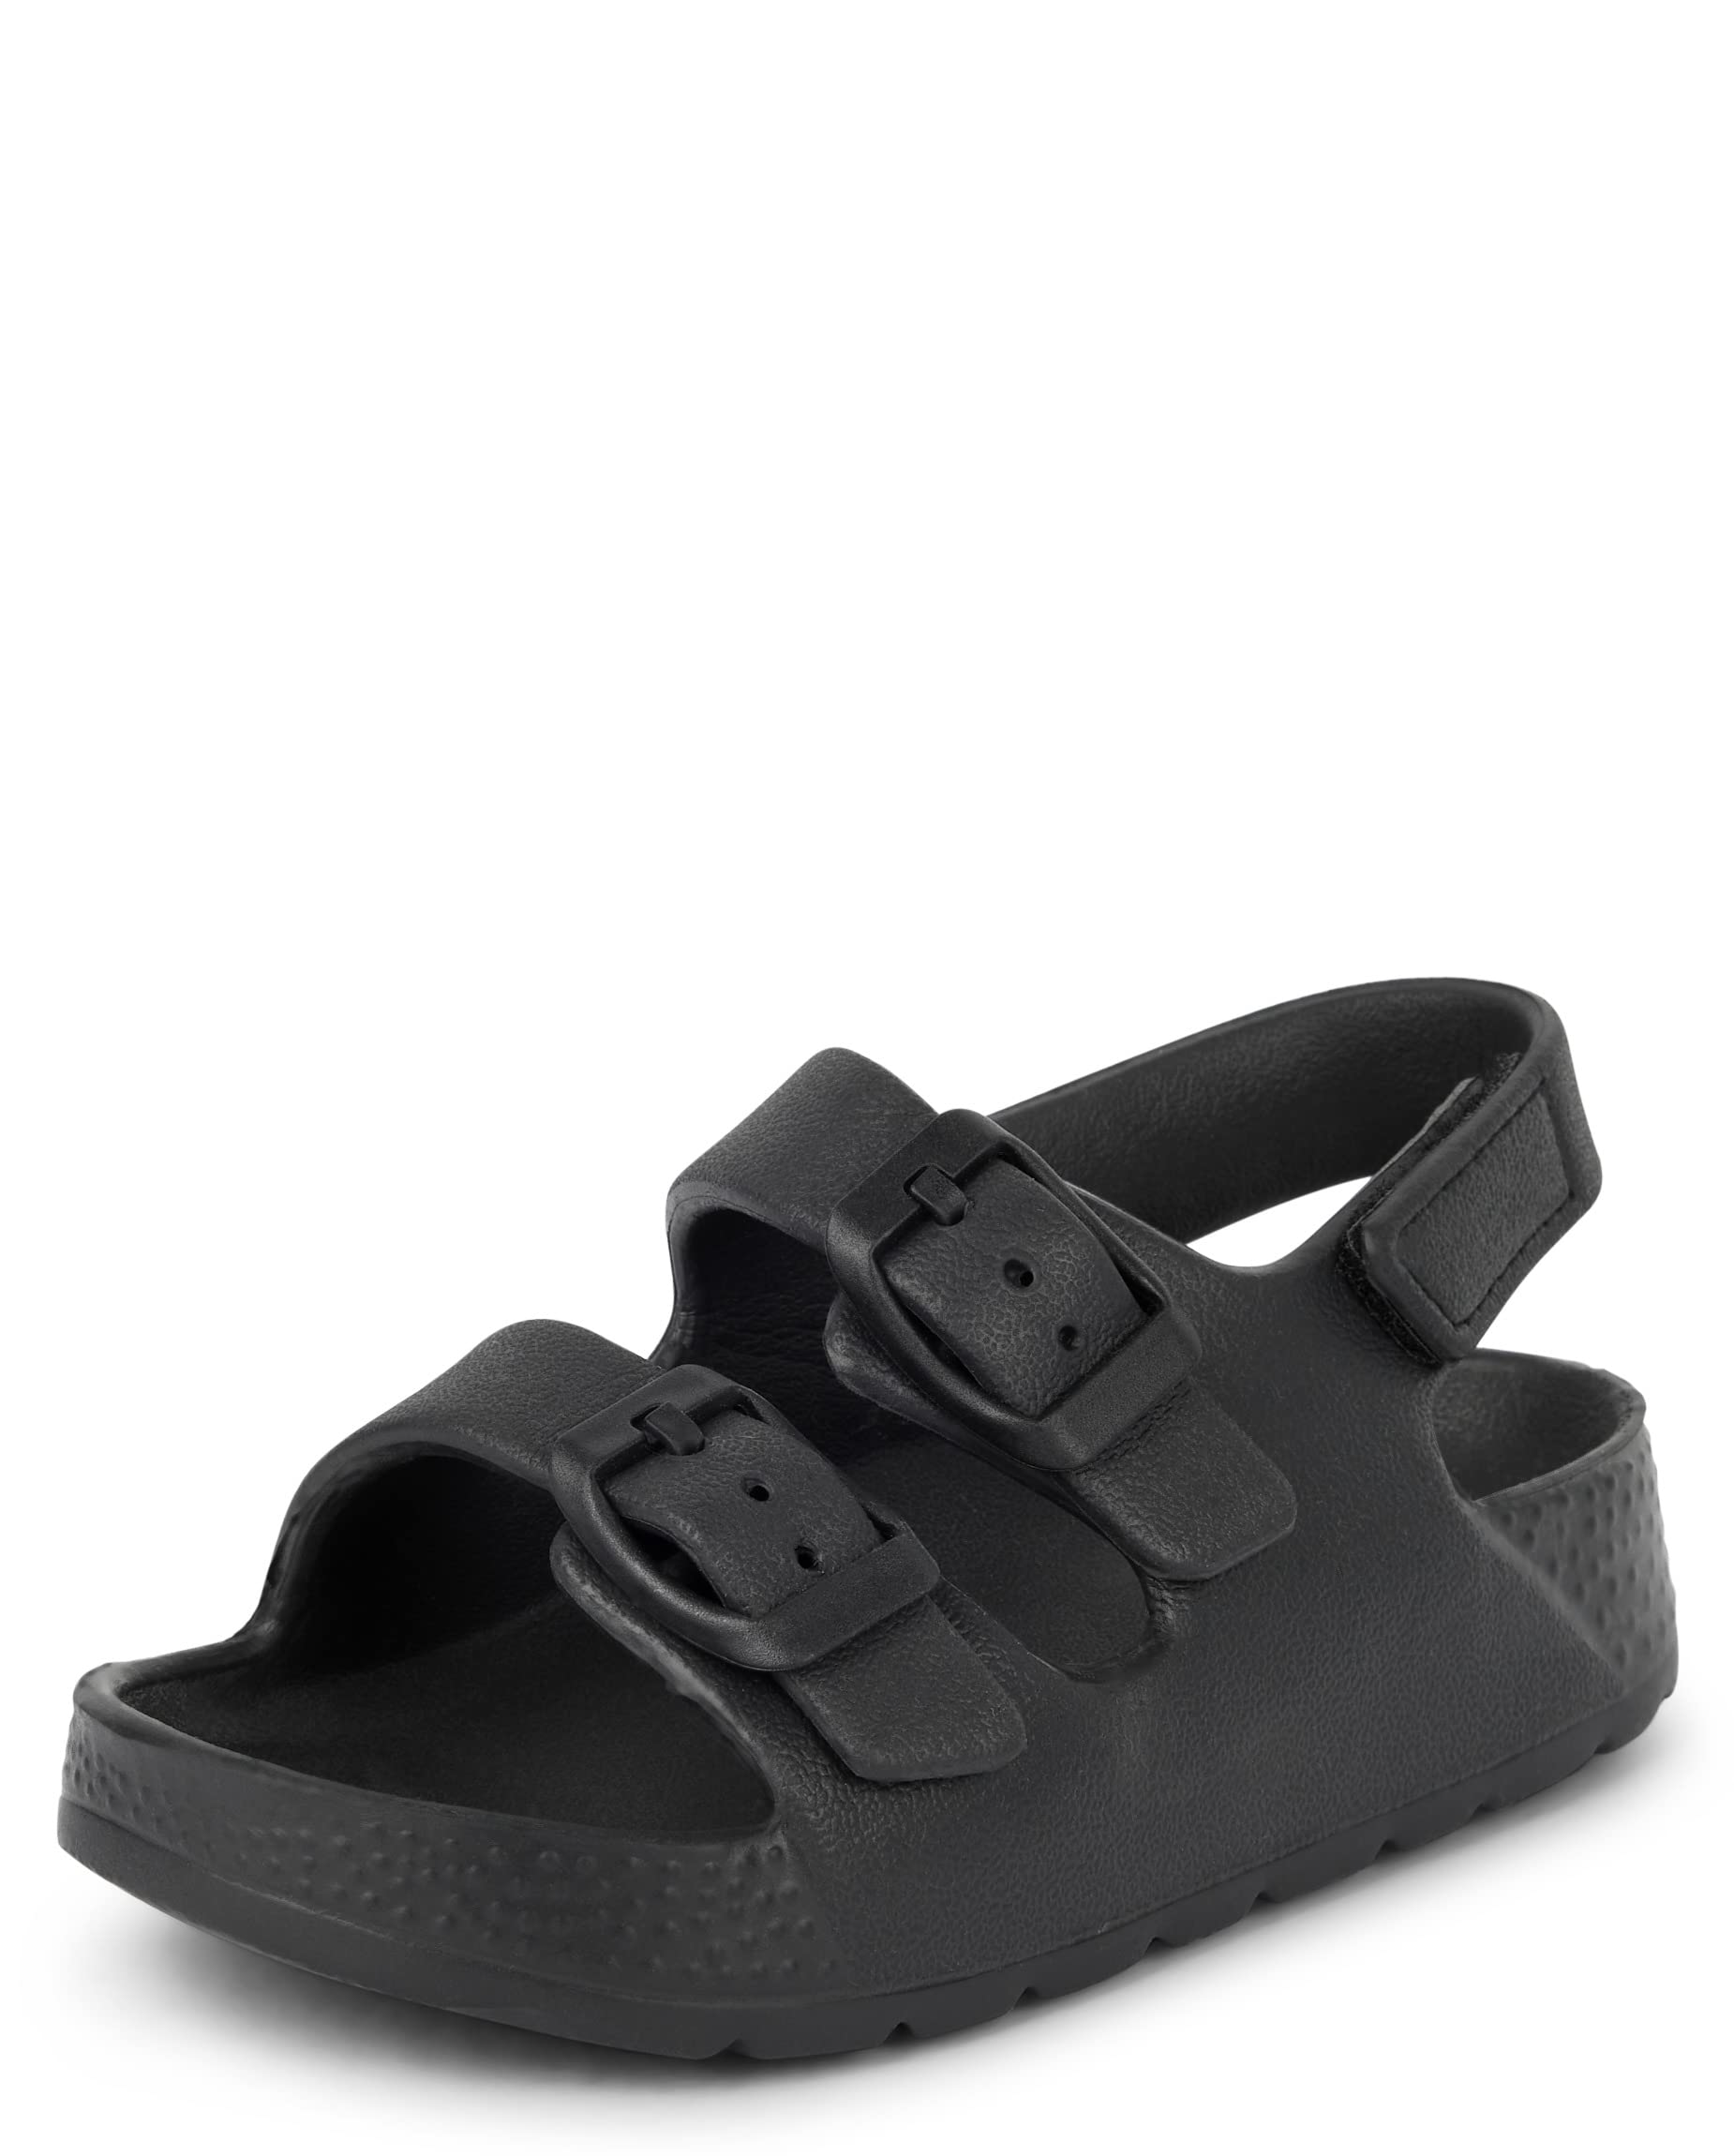 The Children's Place Unisex-Child and Toddler Boys Buckle Slides with Backstrap Sandal